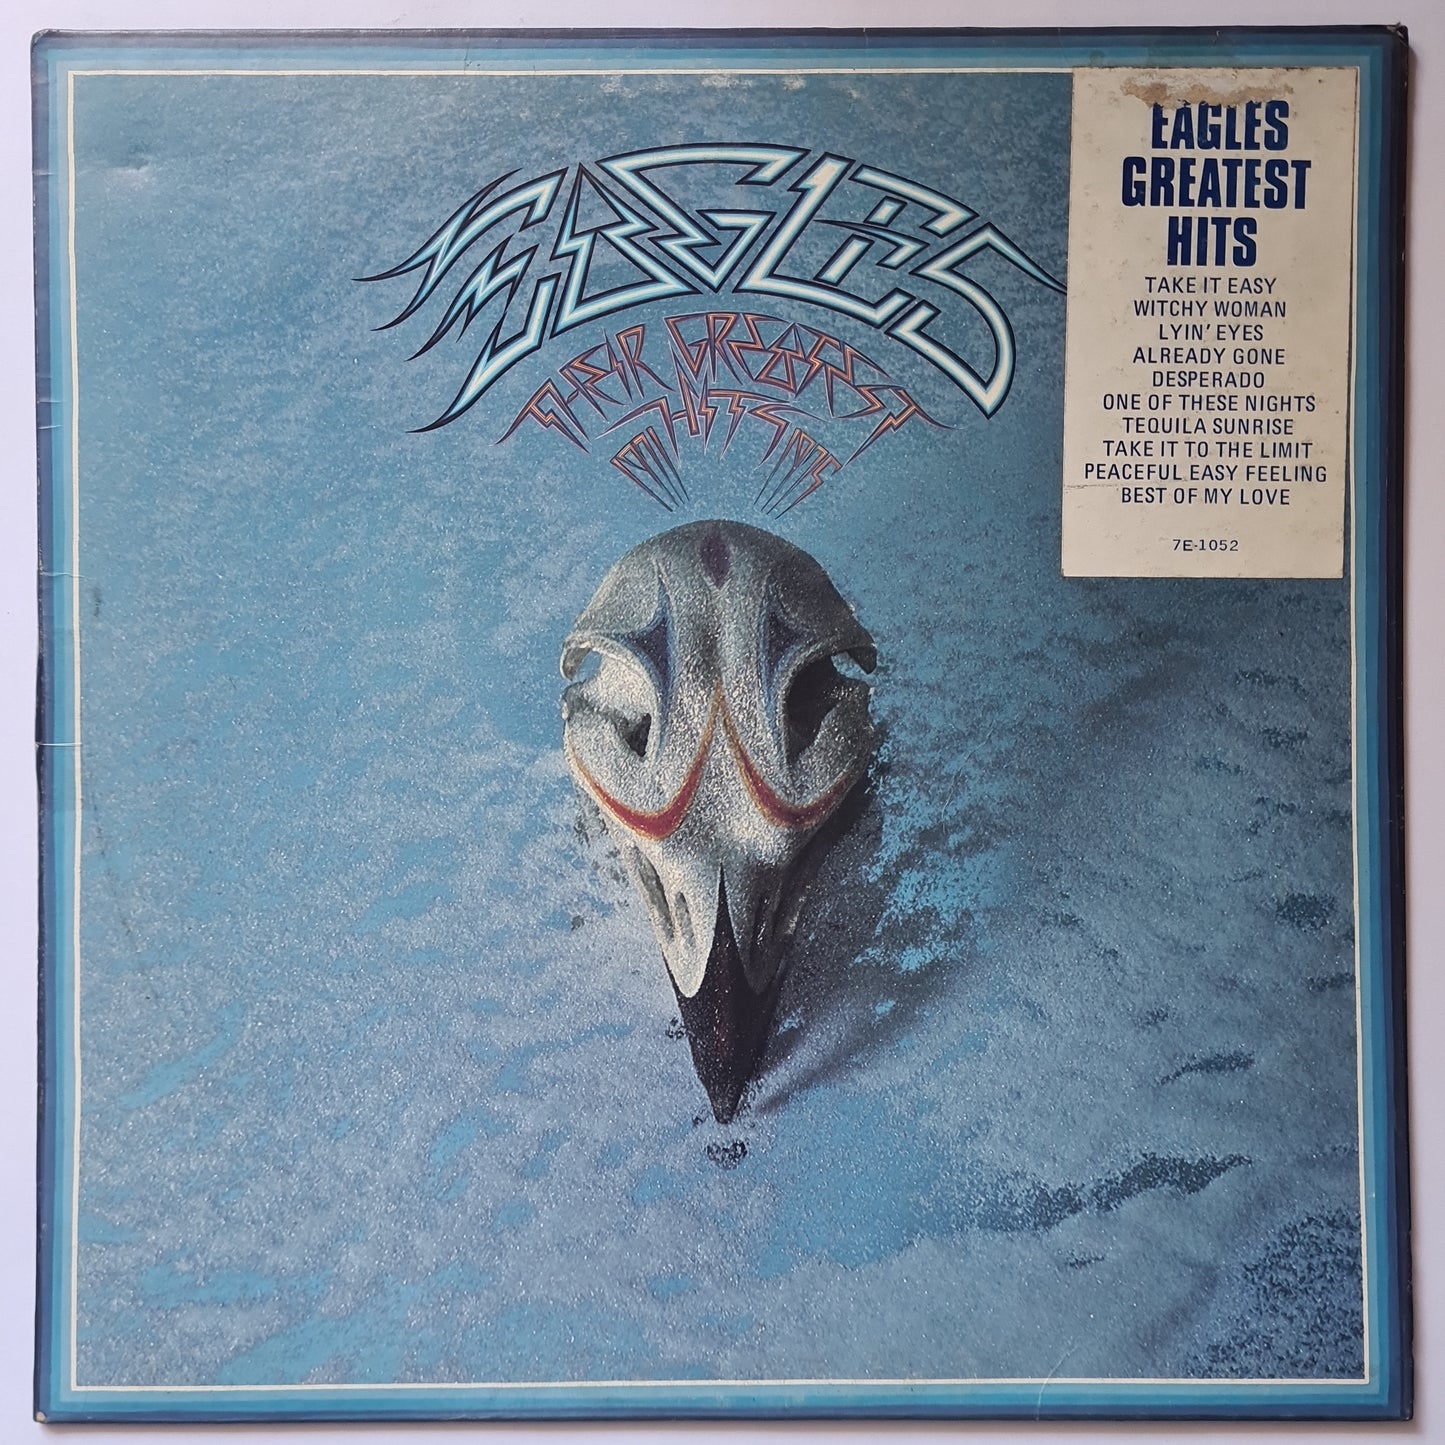 The Eagles – Their Greatest Hits - 1976 - Vinyl Record